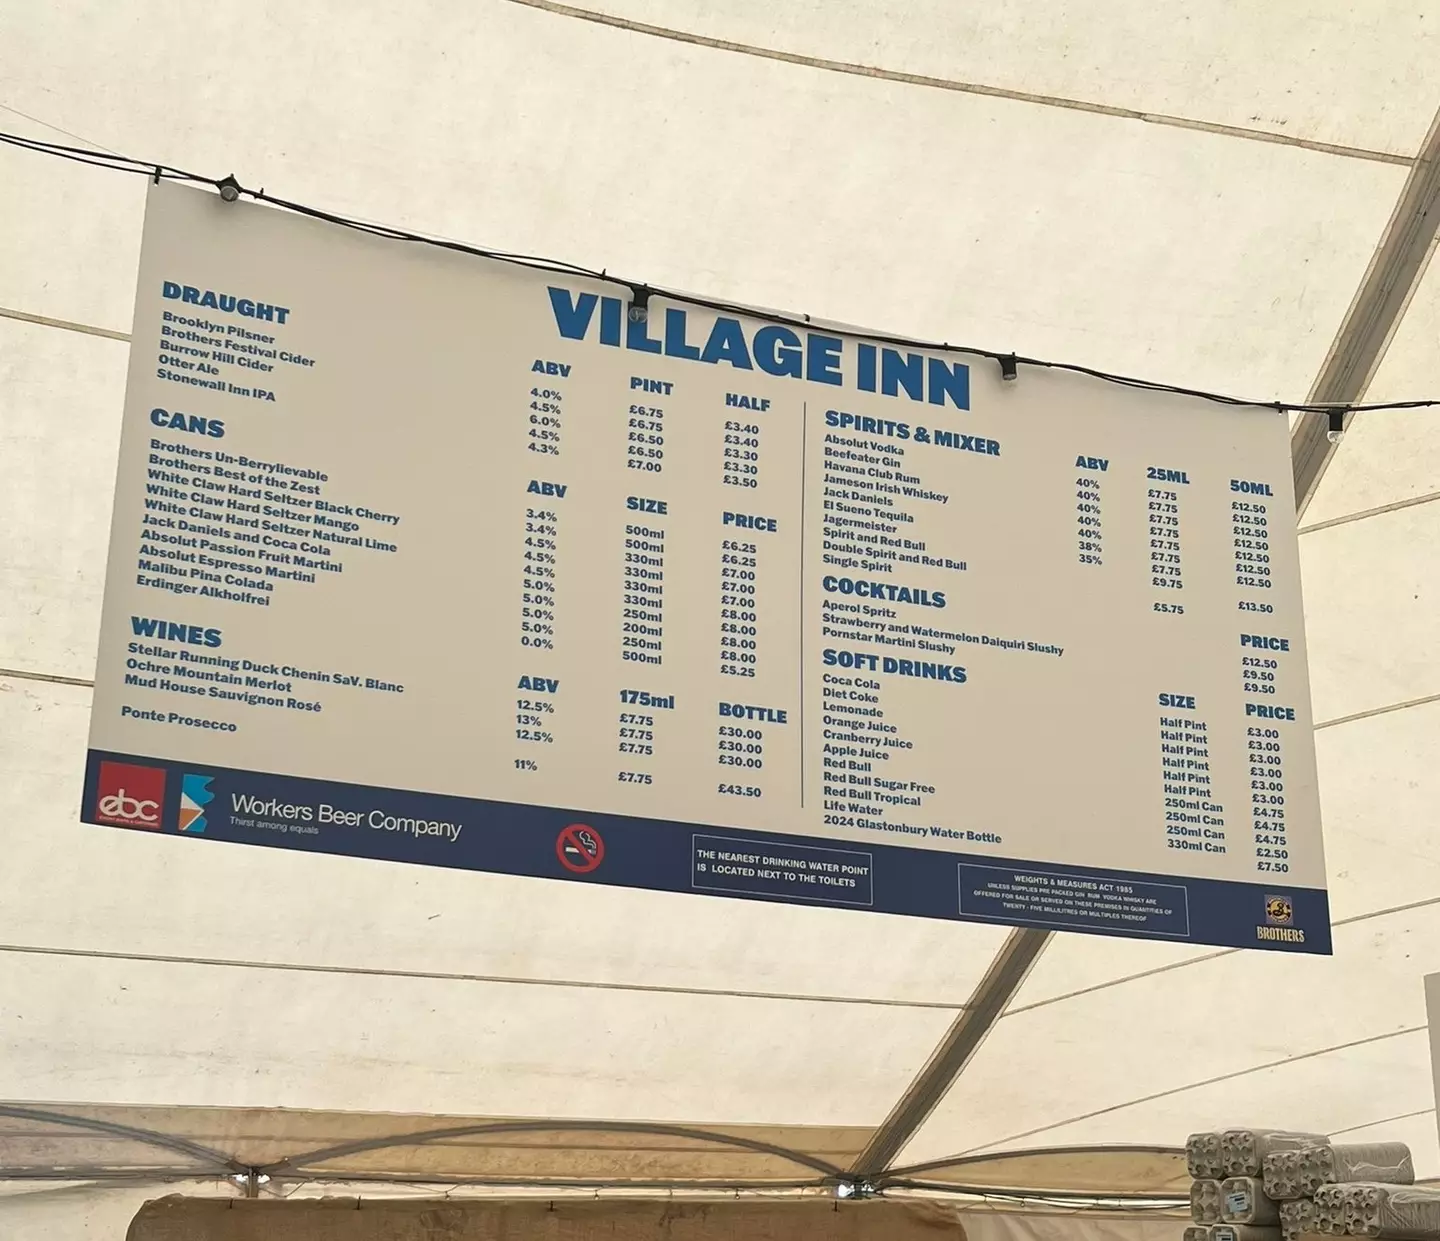 The cost of a can of water at Glastonbury left a lot of people shocked. (X/@glastobation)